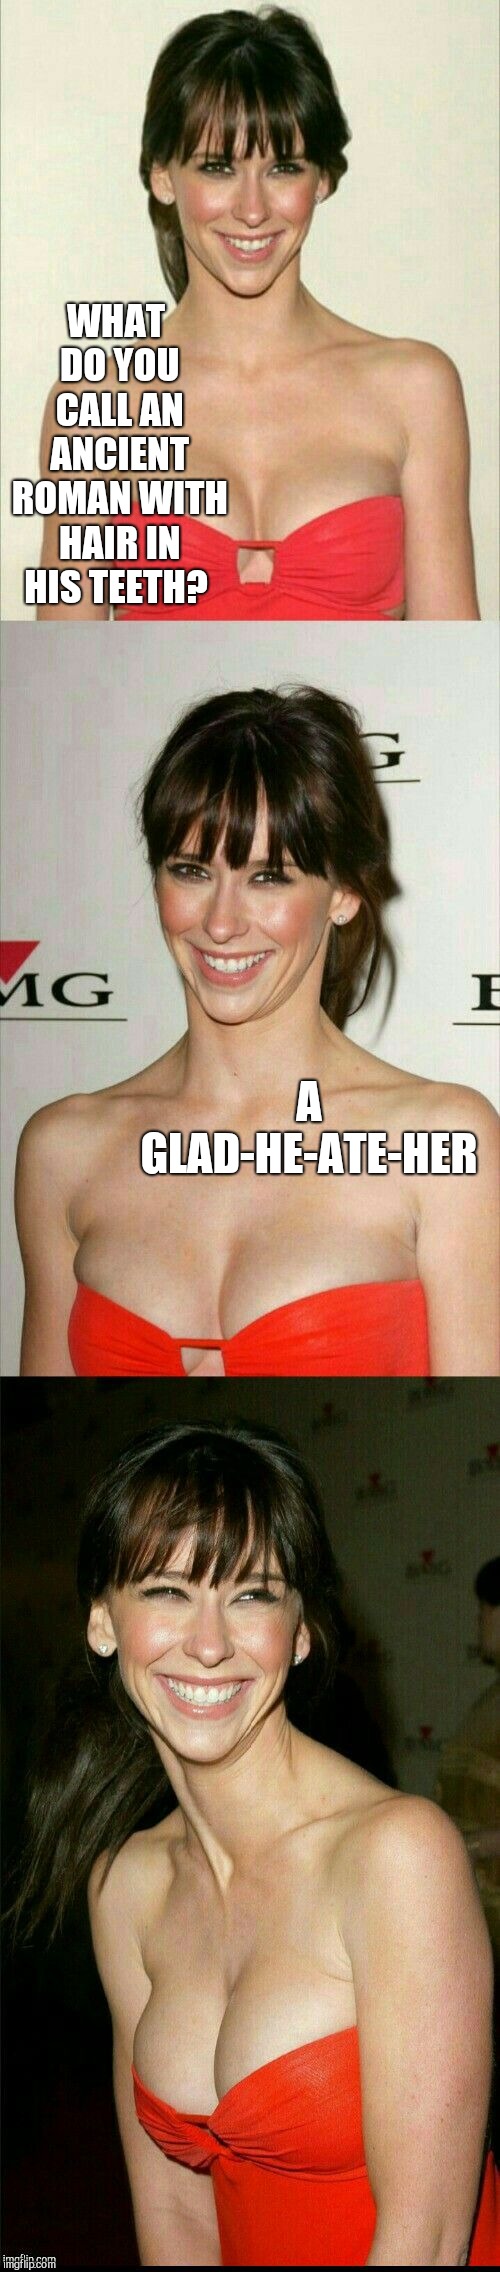 Jennifer Love Hewitt joke template  | WHAT DO YOU CALL AN ANCIENT ROMAN WITH HAIR IN HIS TEETH? A GLAD-HE-ATE-HER | image tagged in jennifer love hewitt joke template,jennifer love hewitt,jbmemegeek,bad puns | made w/ Imgflip meme maker